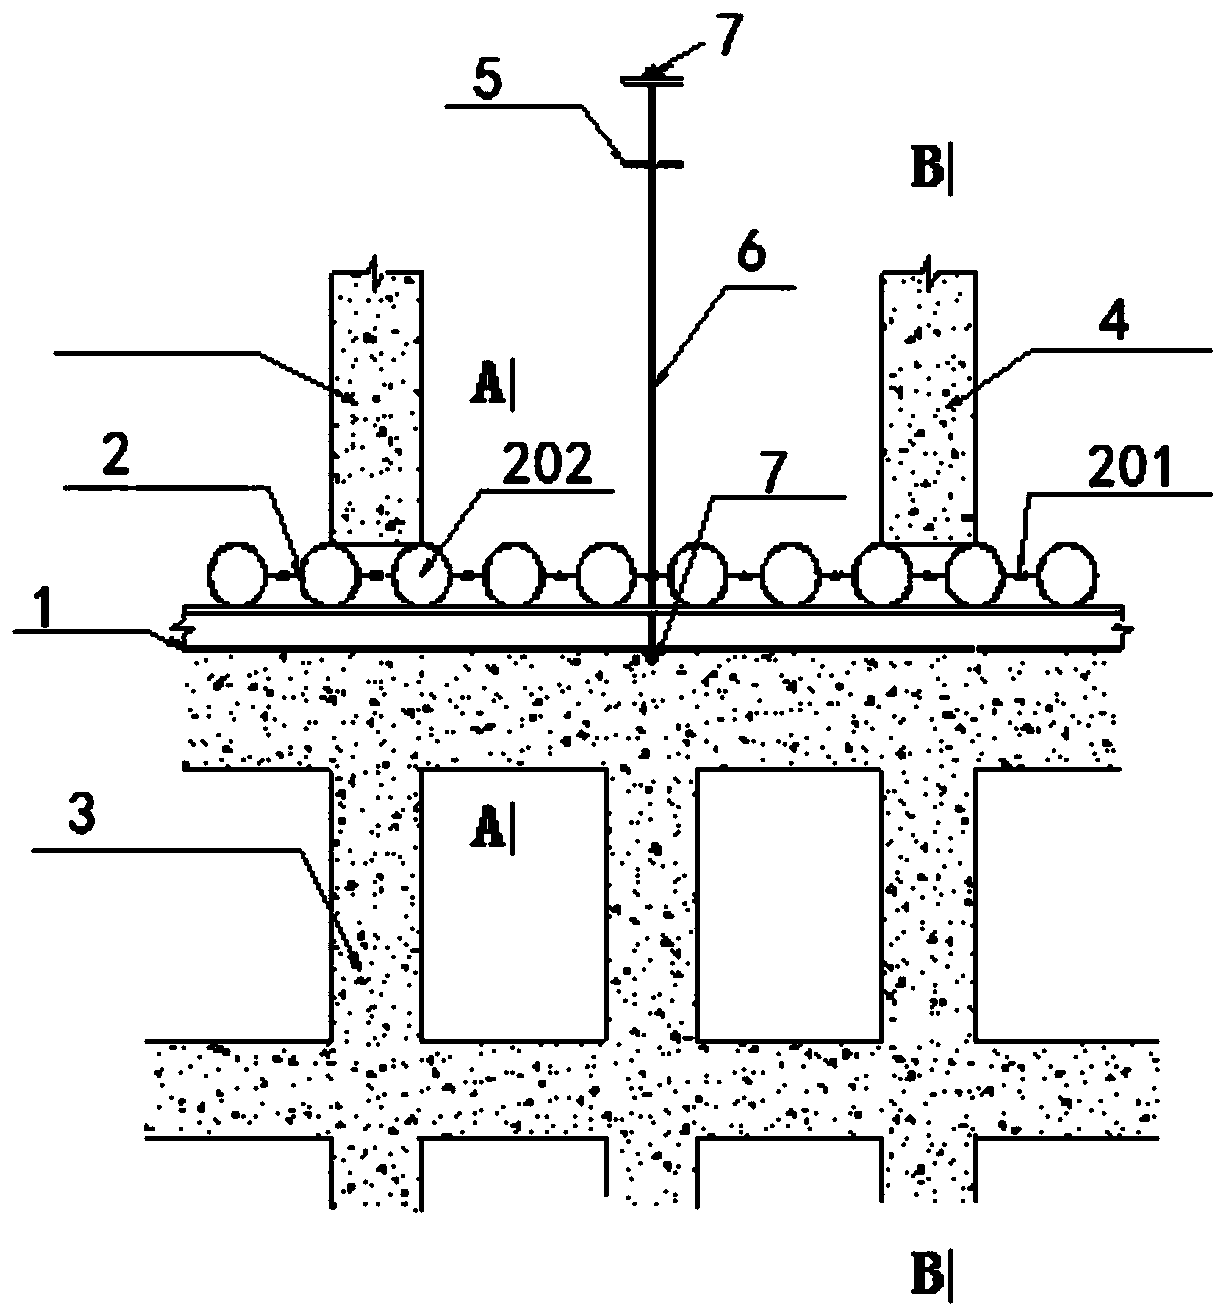 Large area silt fluid soil layer foundation pit suspension supporting comprehensive construction structure and method